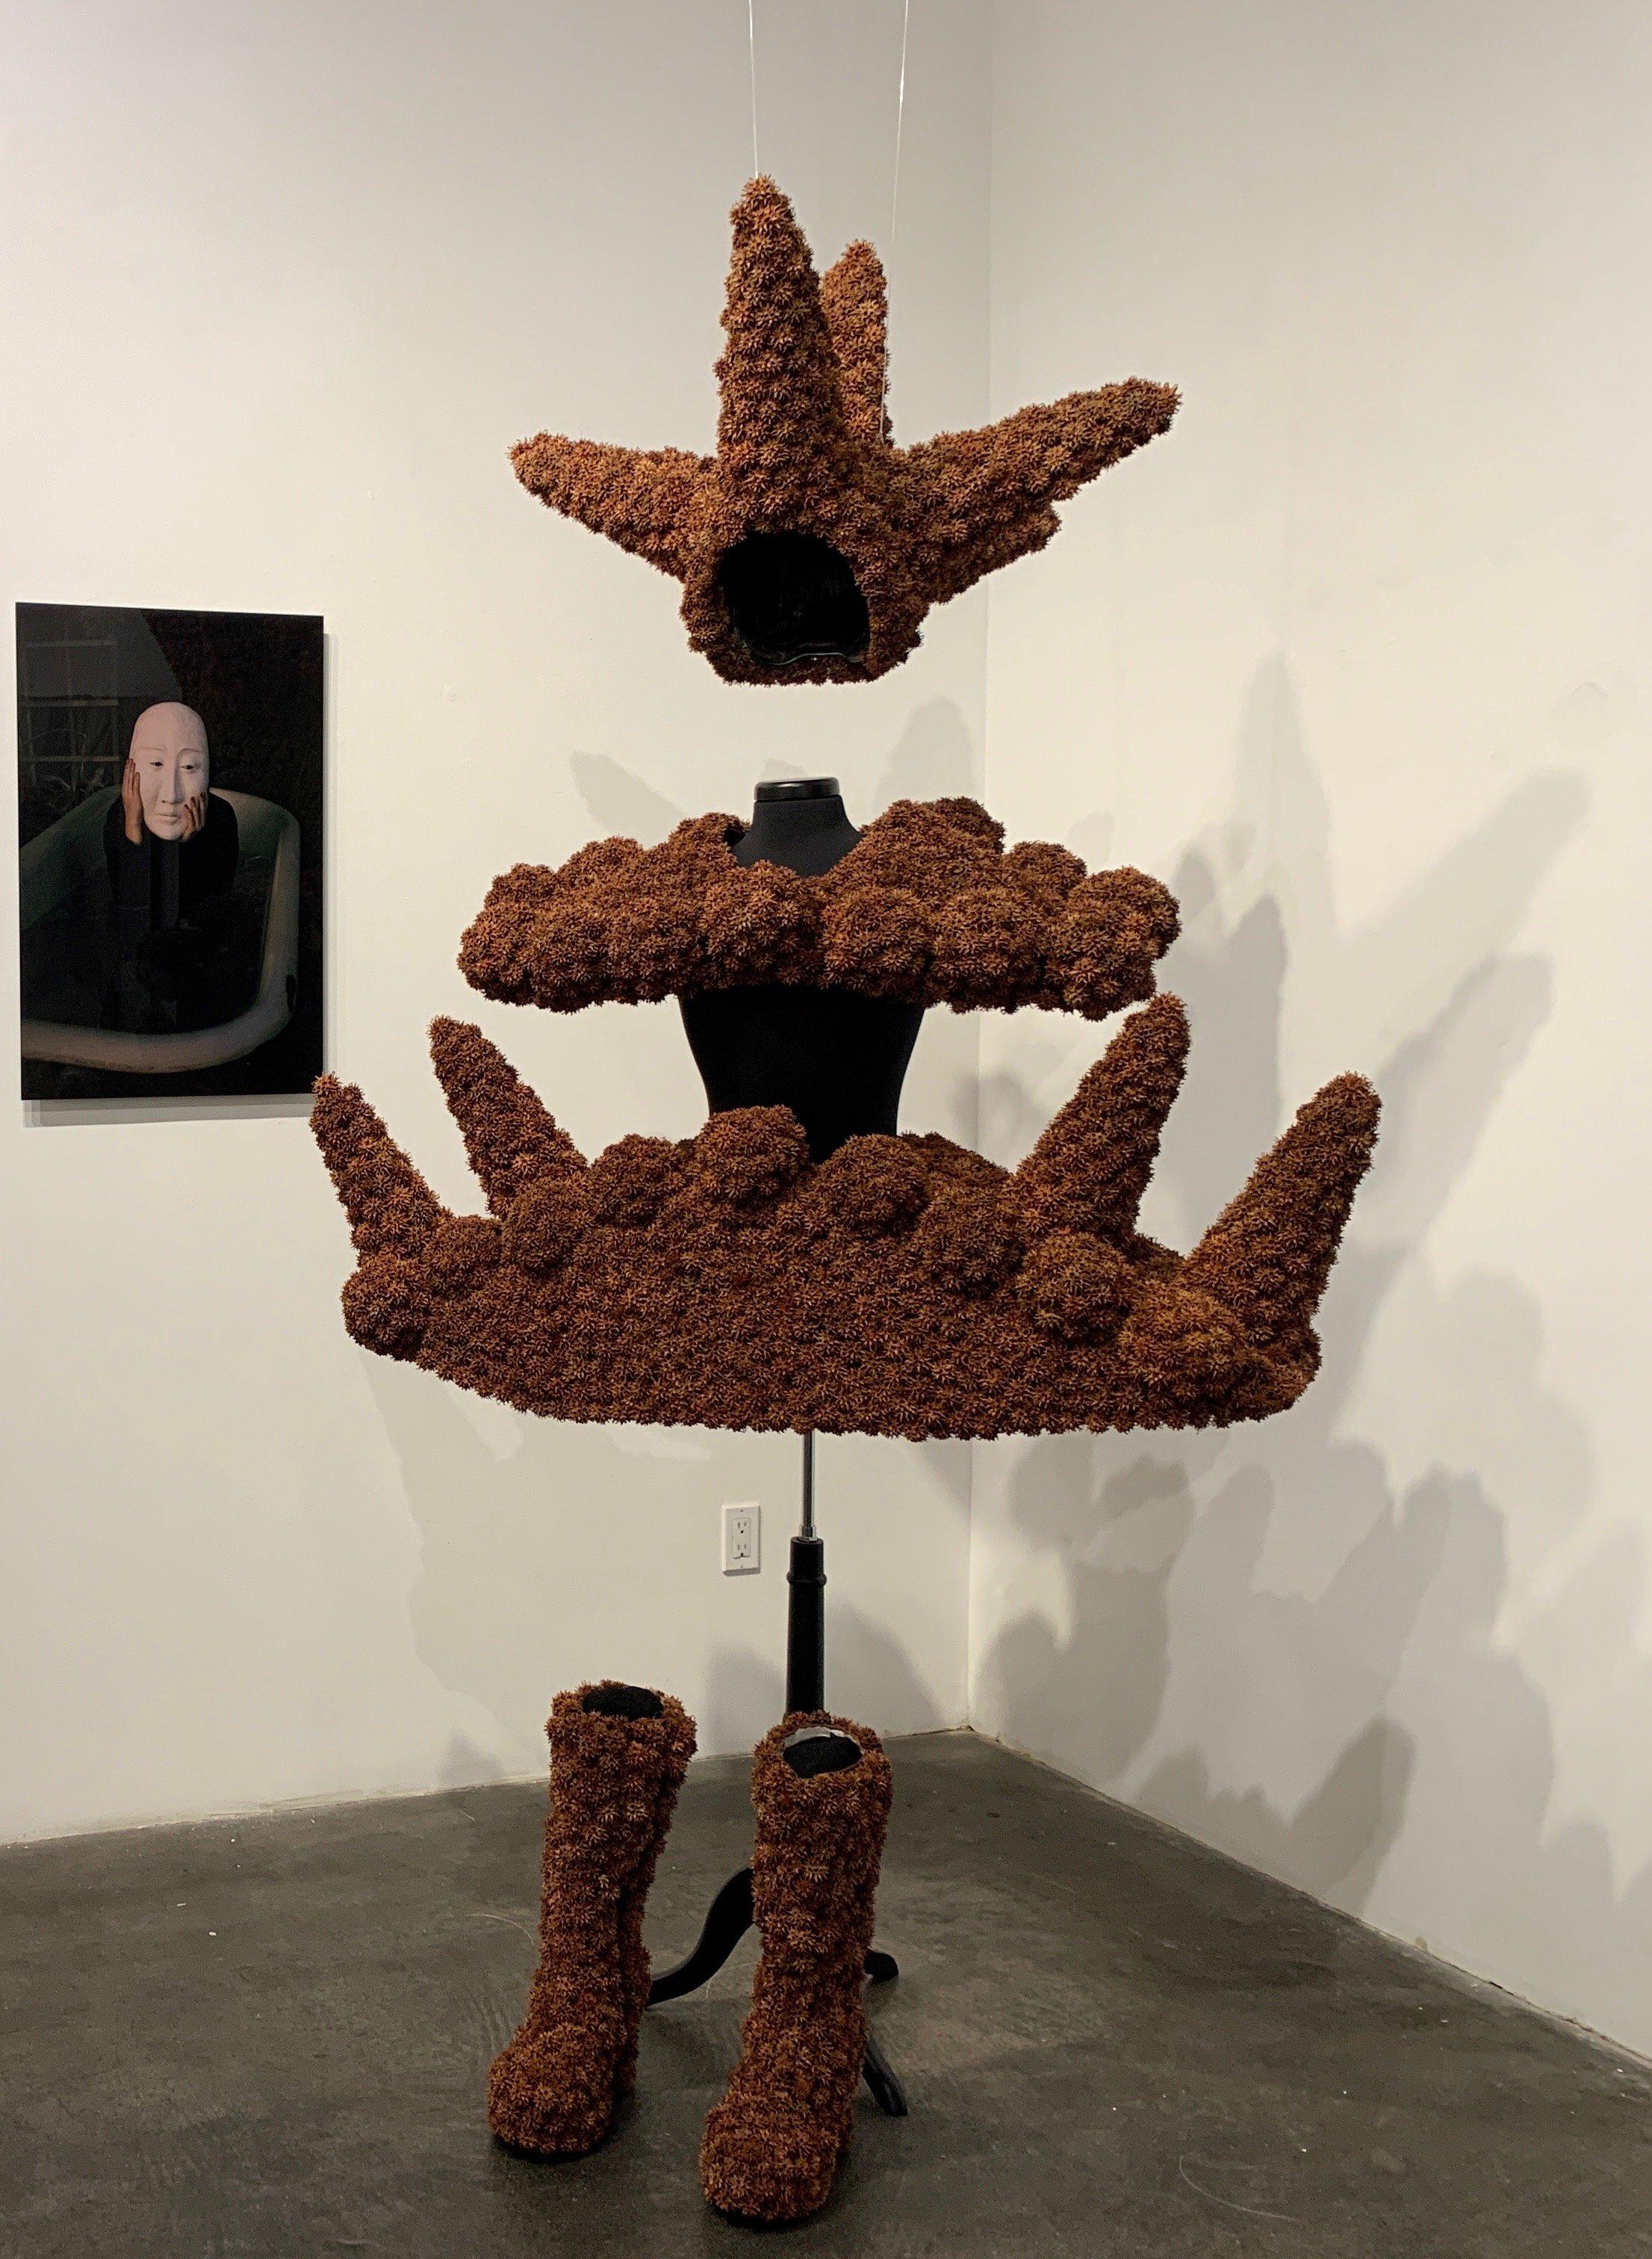 Wearable sculpture created with sweet gum balls. Dimensions variable depending upon how the work is hung/displayed.